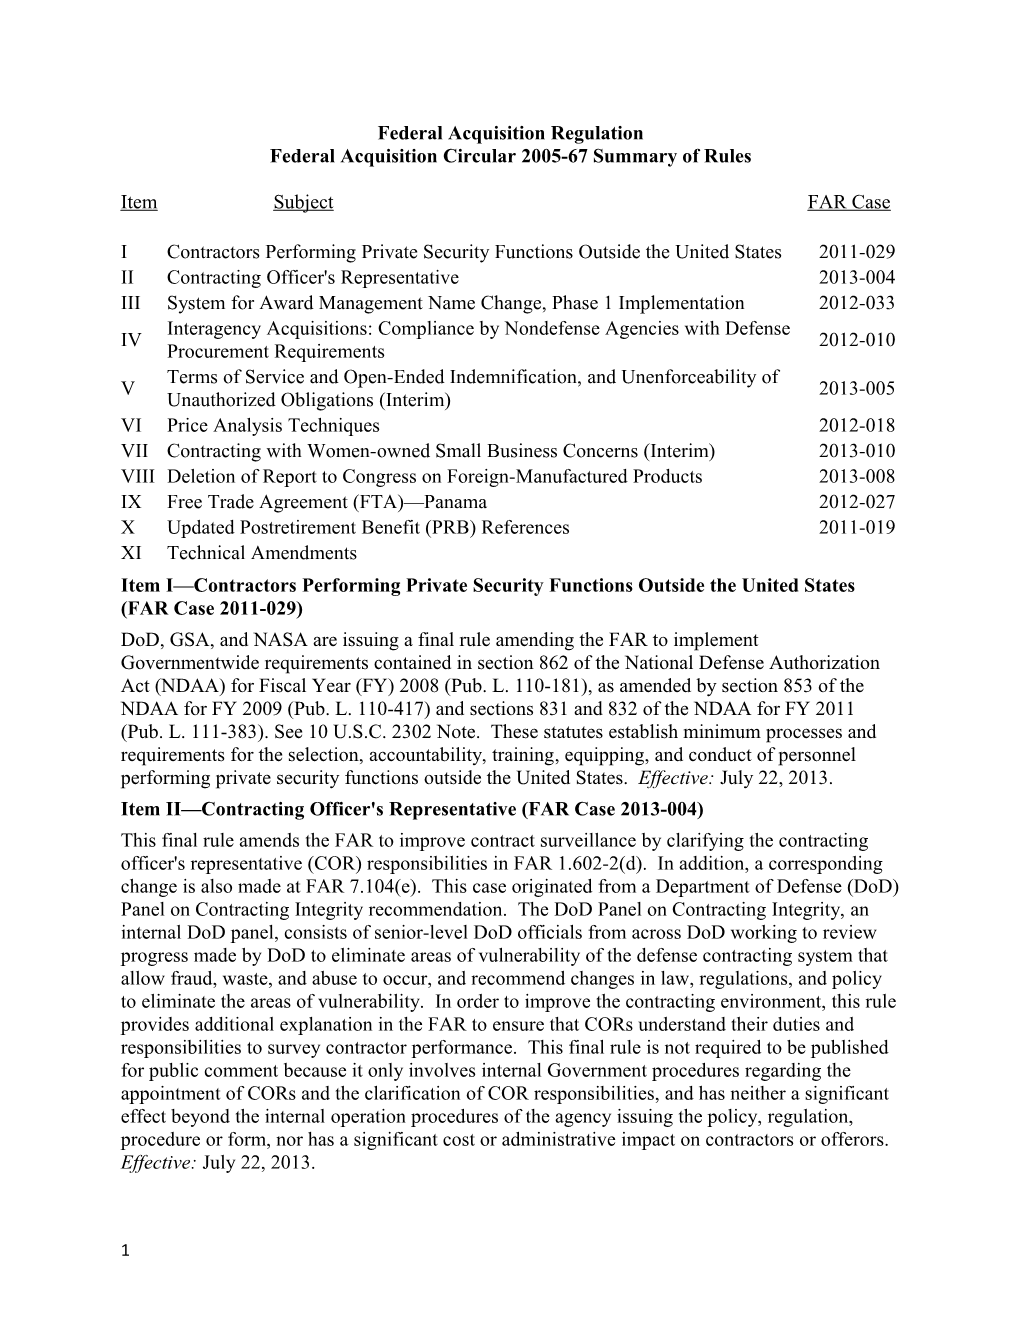 Federal Acquisition Circular 2005-67 Summary of Rules